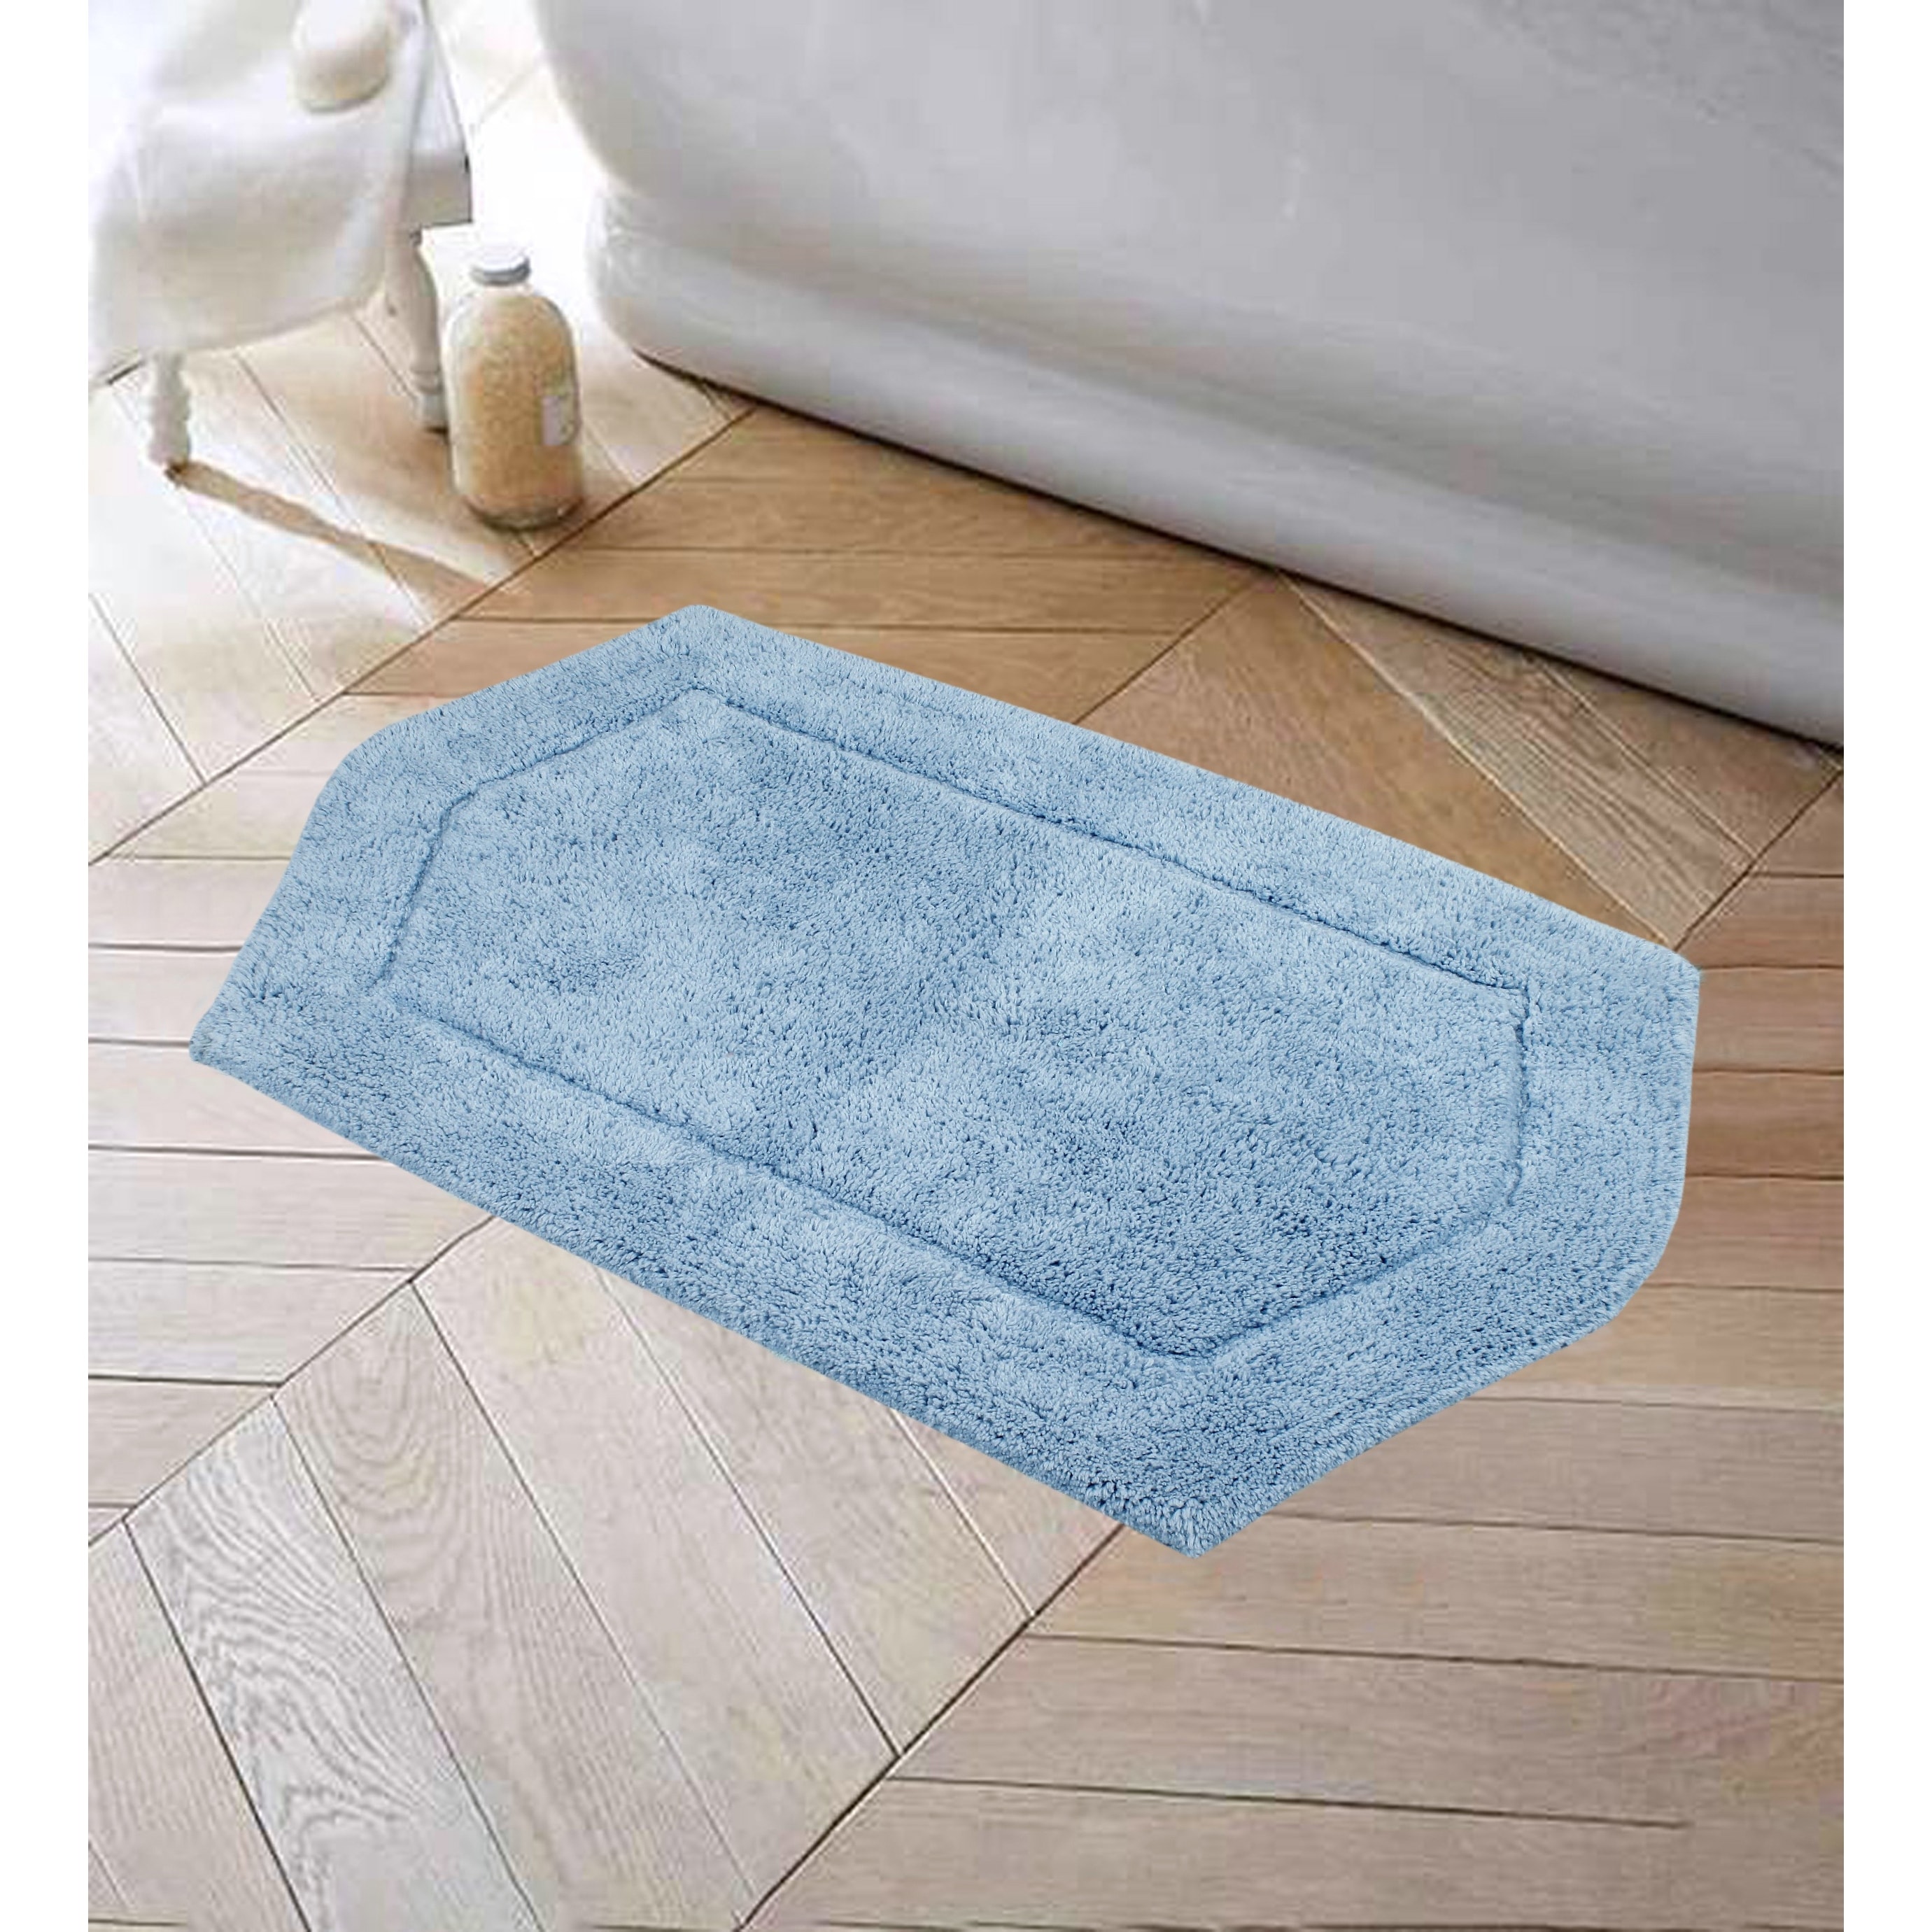 Hoey Memory Foam Bath Mat Set, Bathroom Rugs for 3 Pieces, Toilet Mats, Soft Comfortable, Water Absorption, Non-Slip, Thick, Machine Washable, Easier to